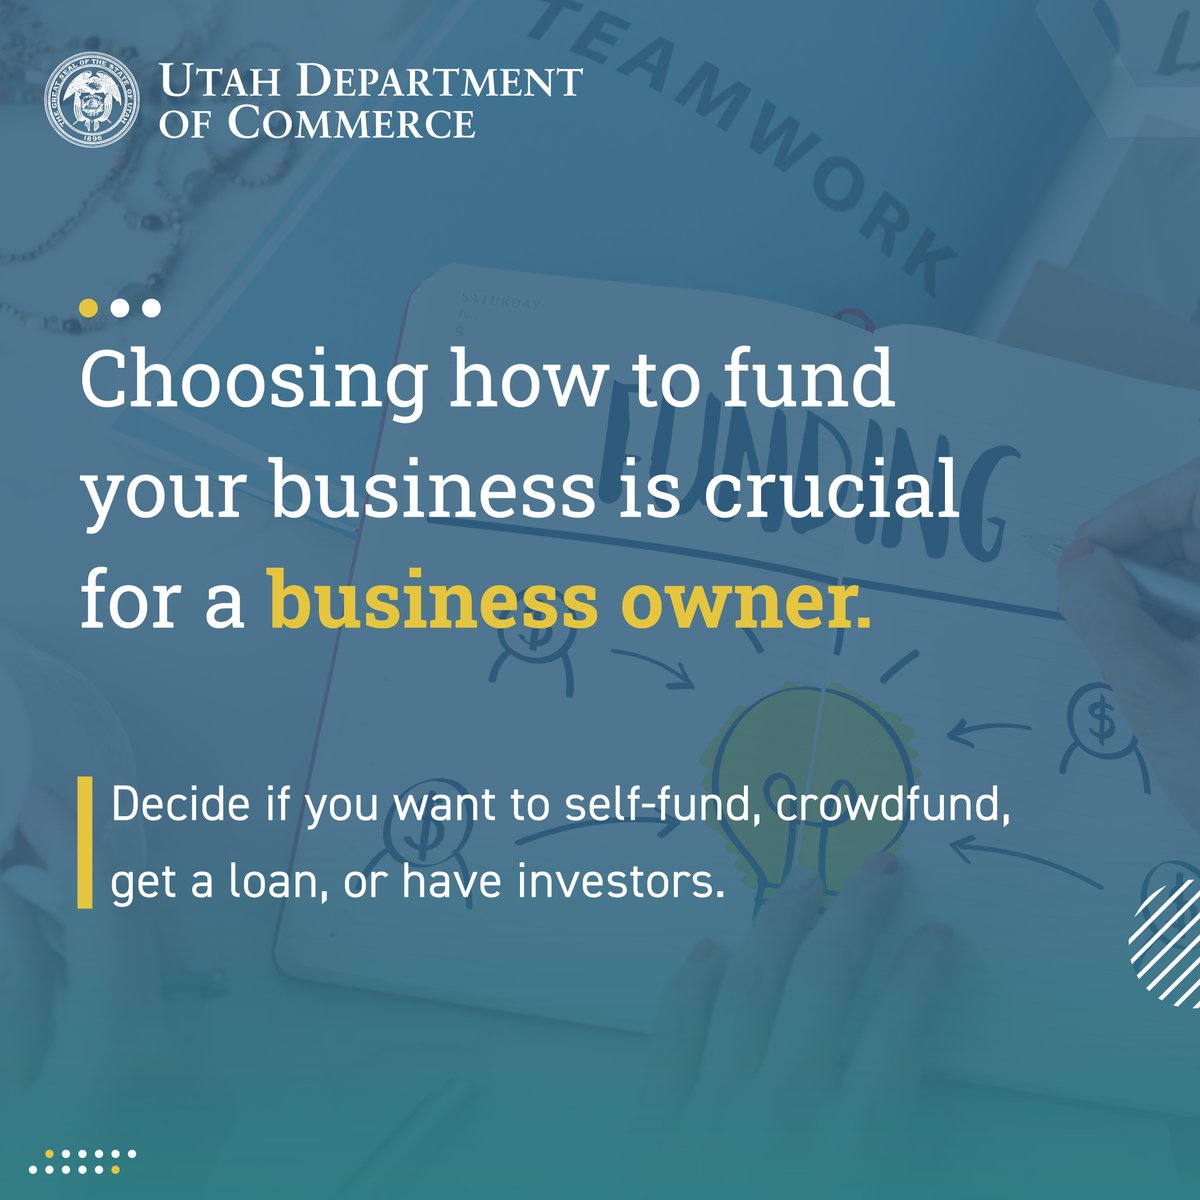 If you want to start a business, one of the first things you need to do is to think about funding. Determine how much money you'll need and the best way for you to get it: •Self-funding • Investors • Loans • Crowdfunding sba.gov/business-guide…